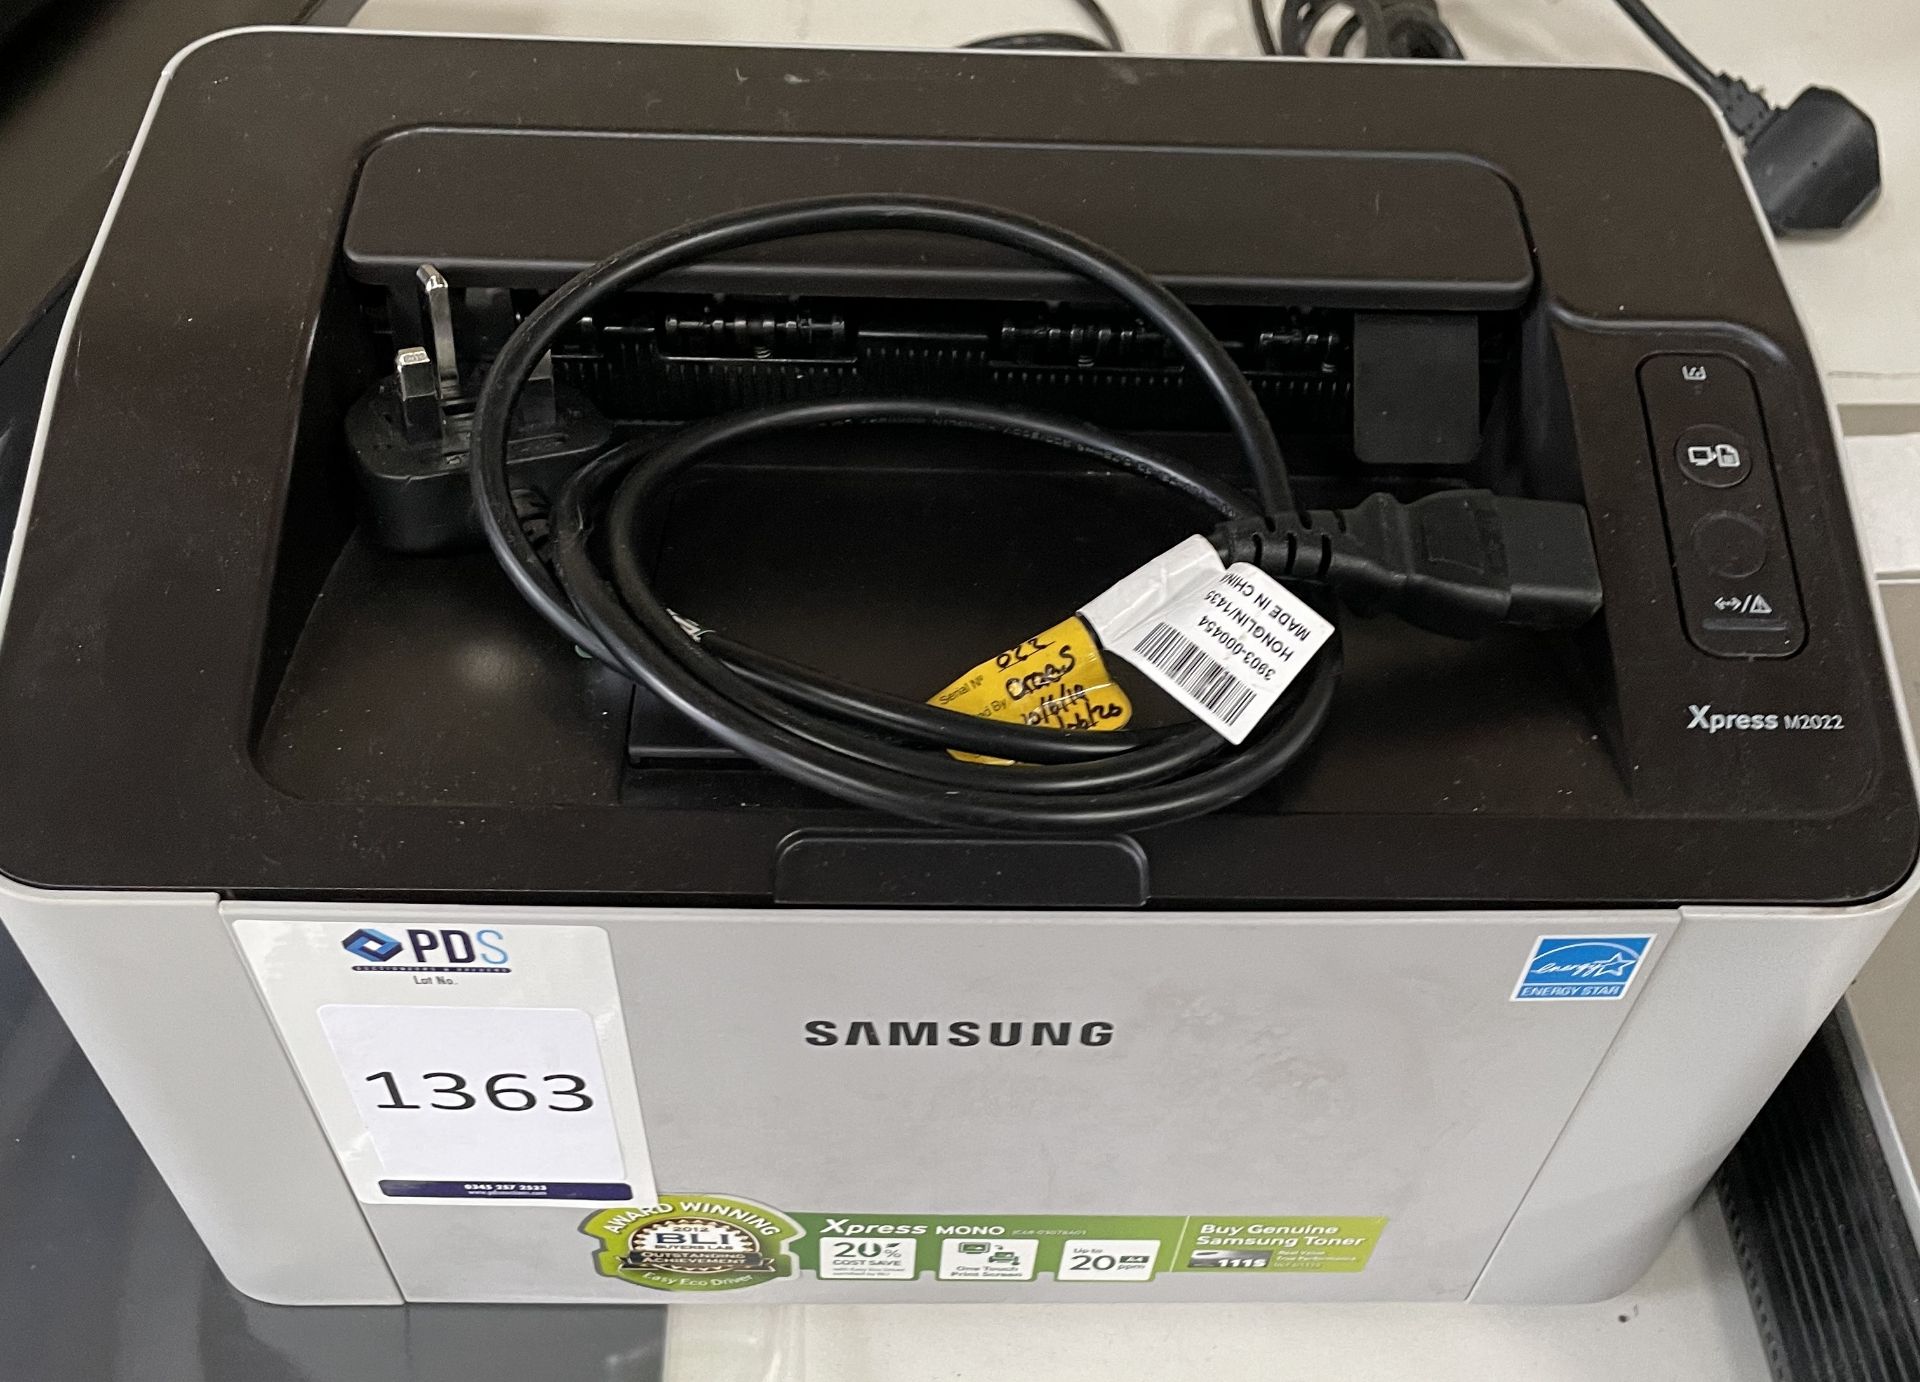 Samsung Xpress M2022 Printer (Location: Brentwood. Please Refer to General Notes)